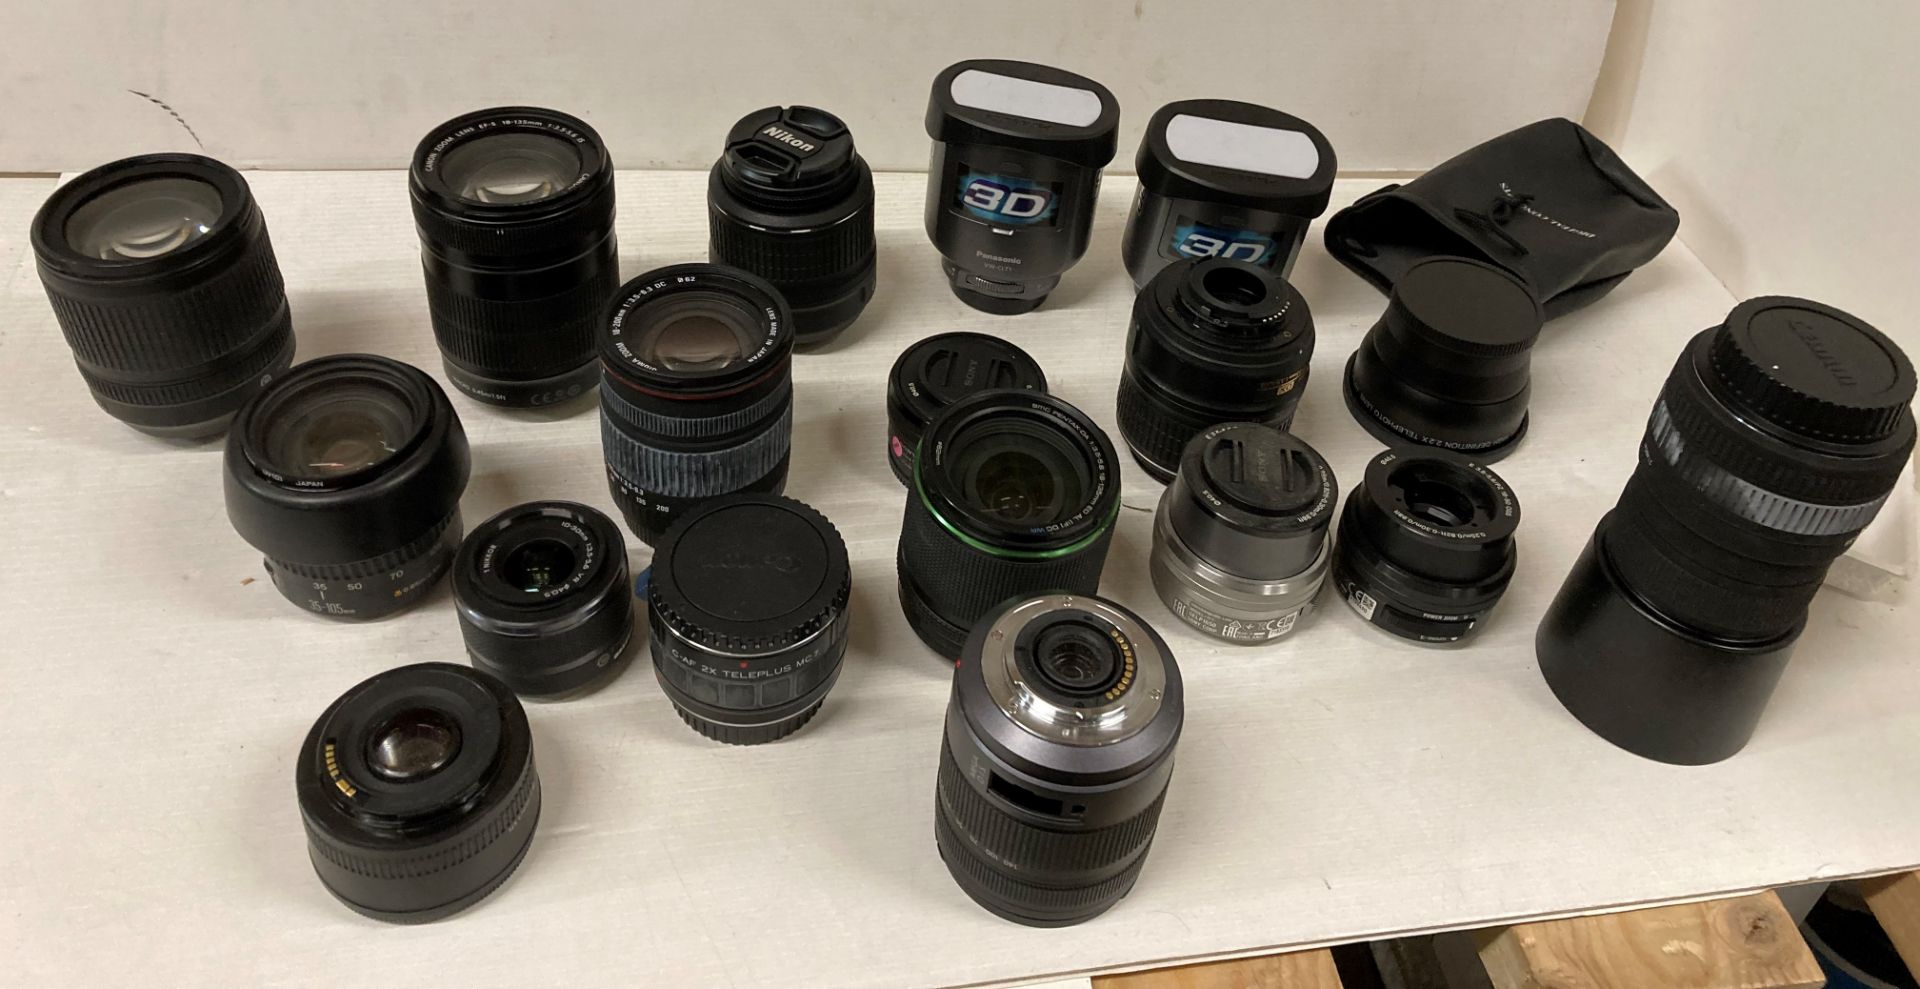 Contents to box - assorted camera lenses by Canon, Panasonic ,Pentax, Nikon,